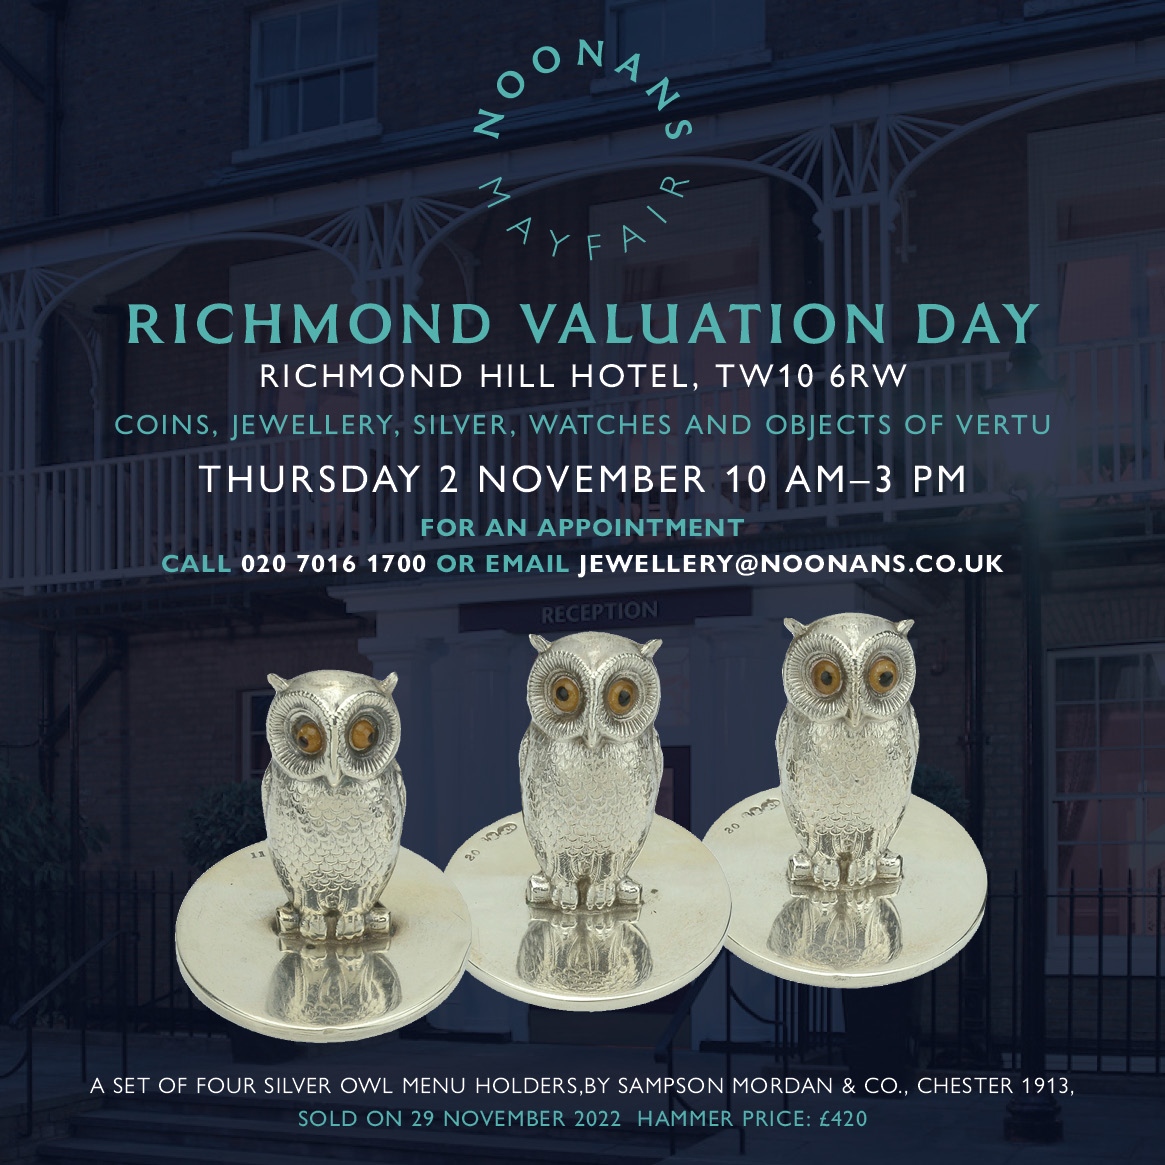 TOMORROW! 10am - 3pm!⁠
Our #COINS #JEWELLERY #SILVER #WATCHES⁠ #OBJECTSOFVERTU
#VALUATIONDAY⁠
⁠
at RICHMOND HILL HOTEL, Richmond-on-Thames⁠
TW10 6RW⁠
⁠
Thursday 2nd November 10am - 3pm⁠
#Richmond #richmondonthames⁠
⁠
noonans.co.uk/news-and-event…